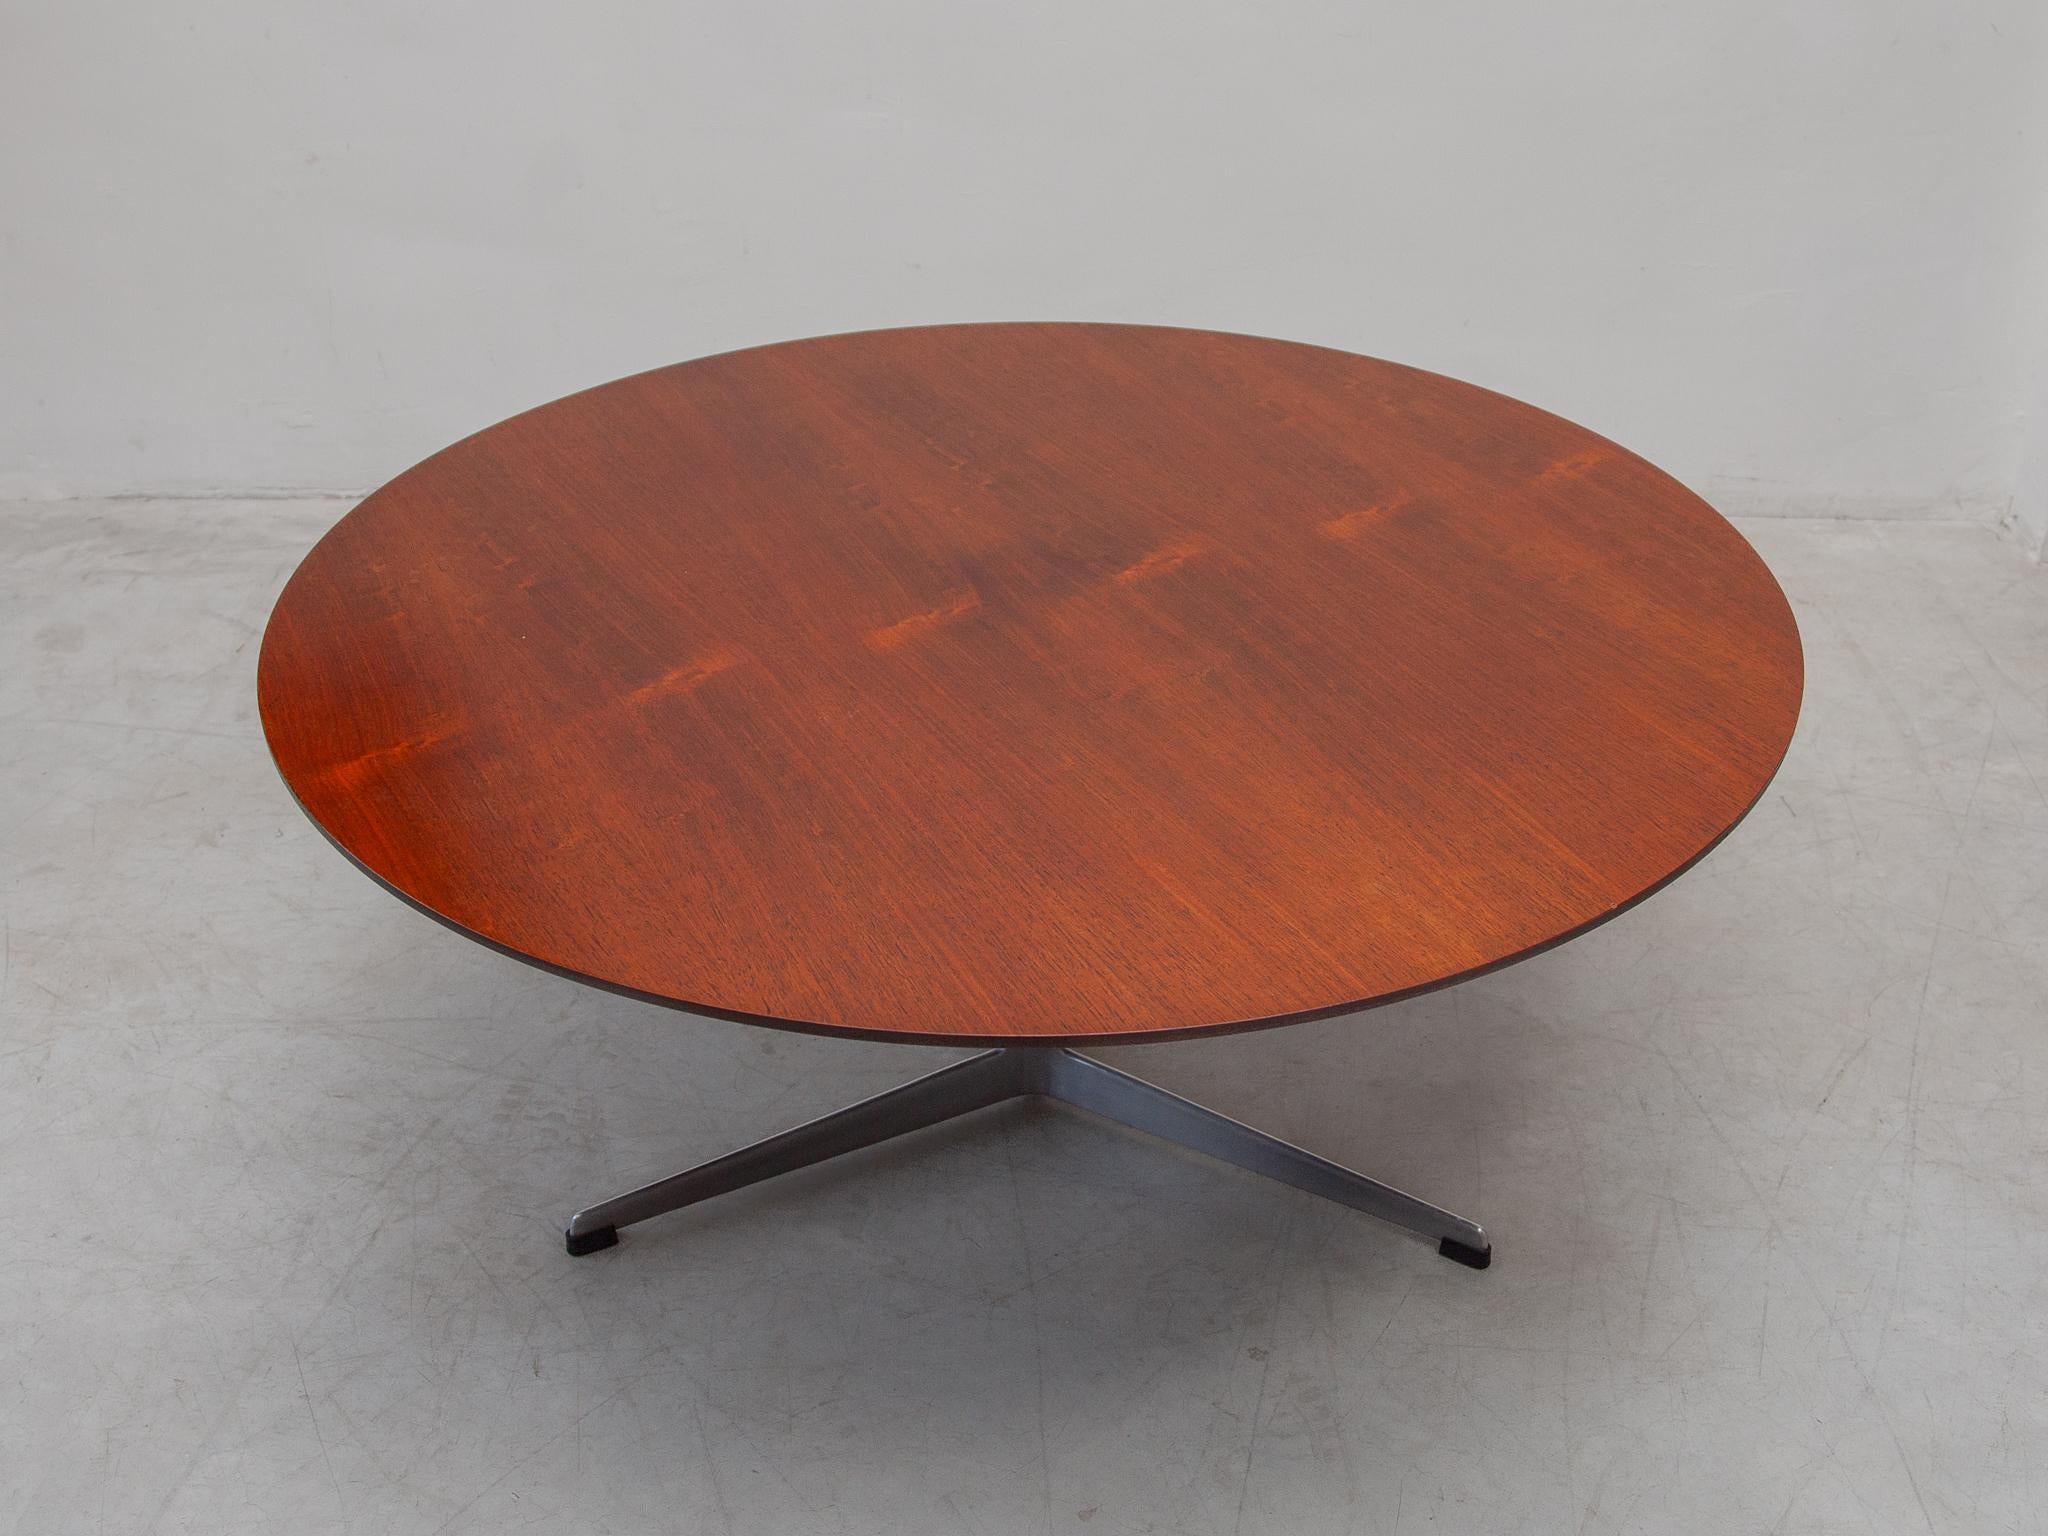 Circular Coffee Table. Design about 1968. Tripod base in aluminium, top in teak wood. Dimensions H.47 x W.110 cm. Marked with 'Danish Furniture Controll' label.